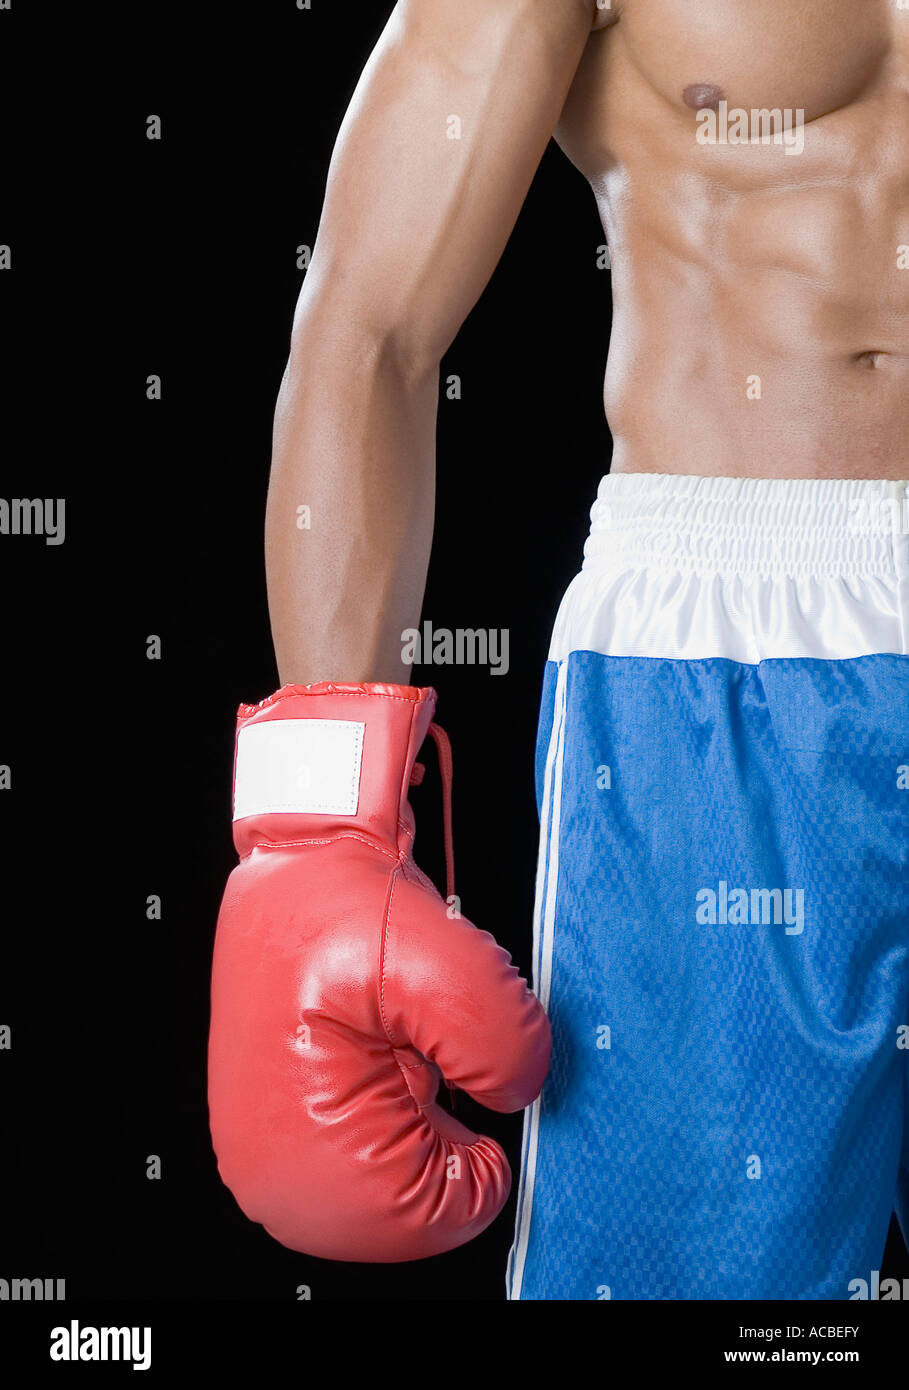 Mid section view of a boxer wearing a boxing glove Stock Photo